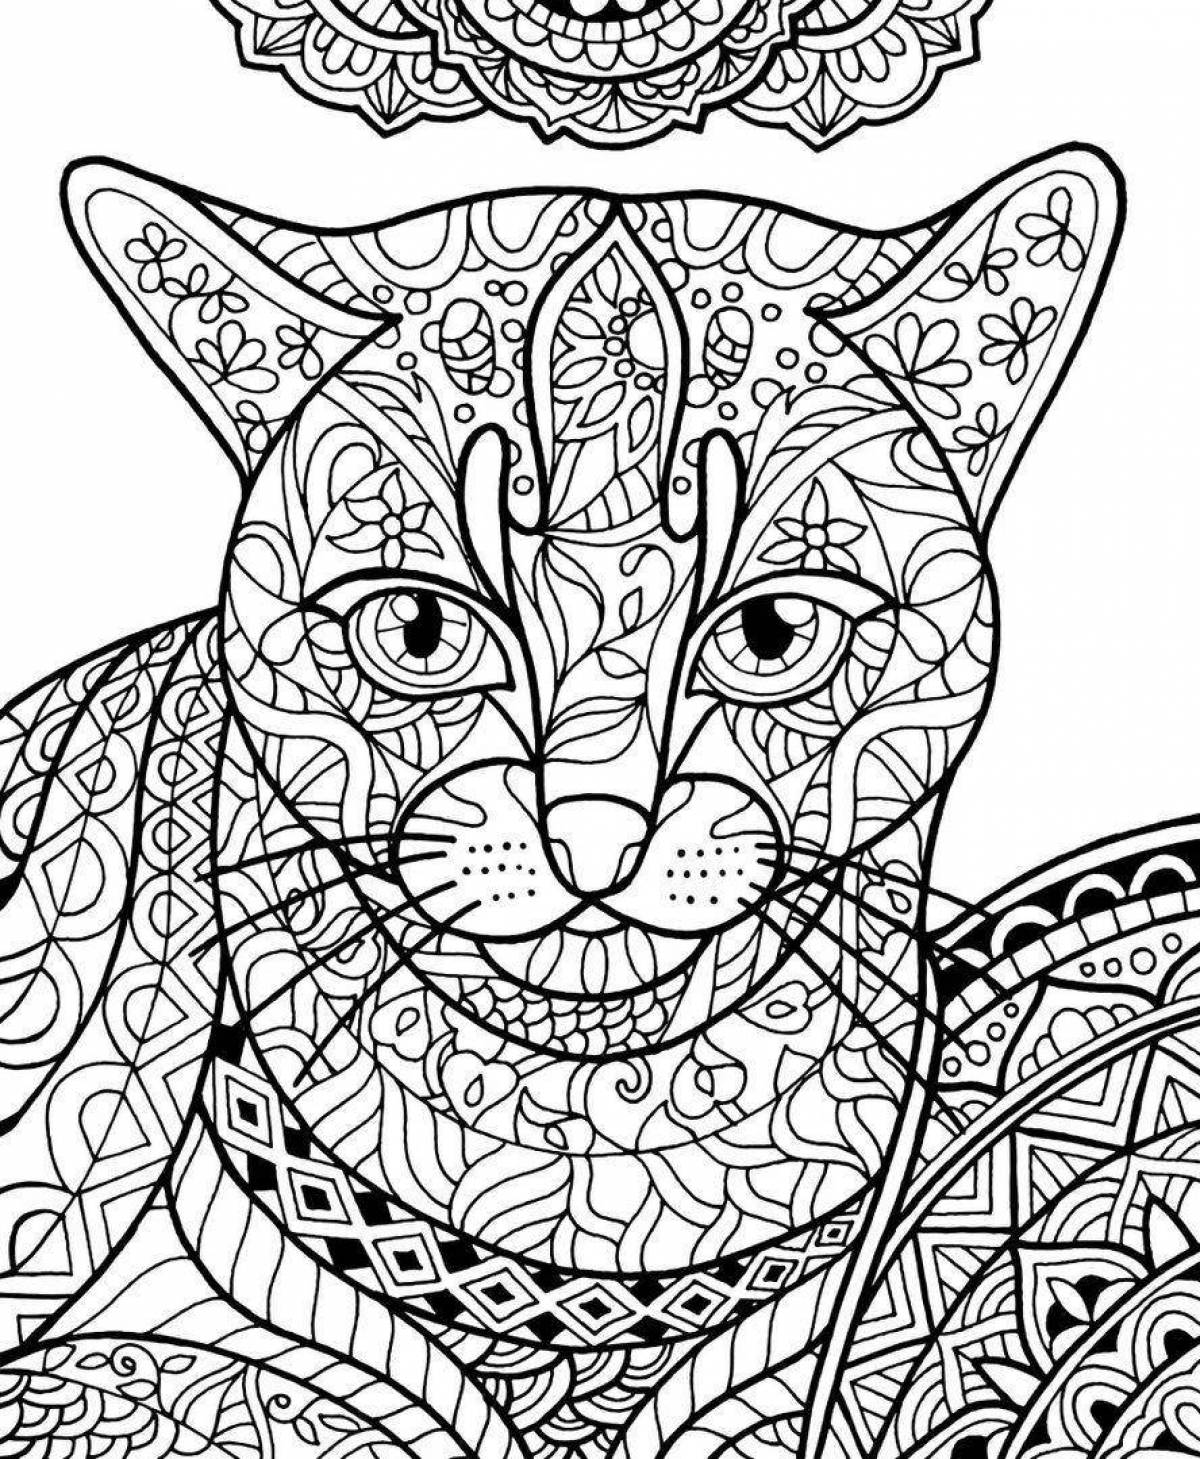 Coloring page cute cat with pattern